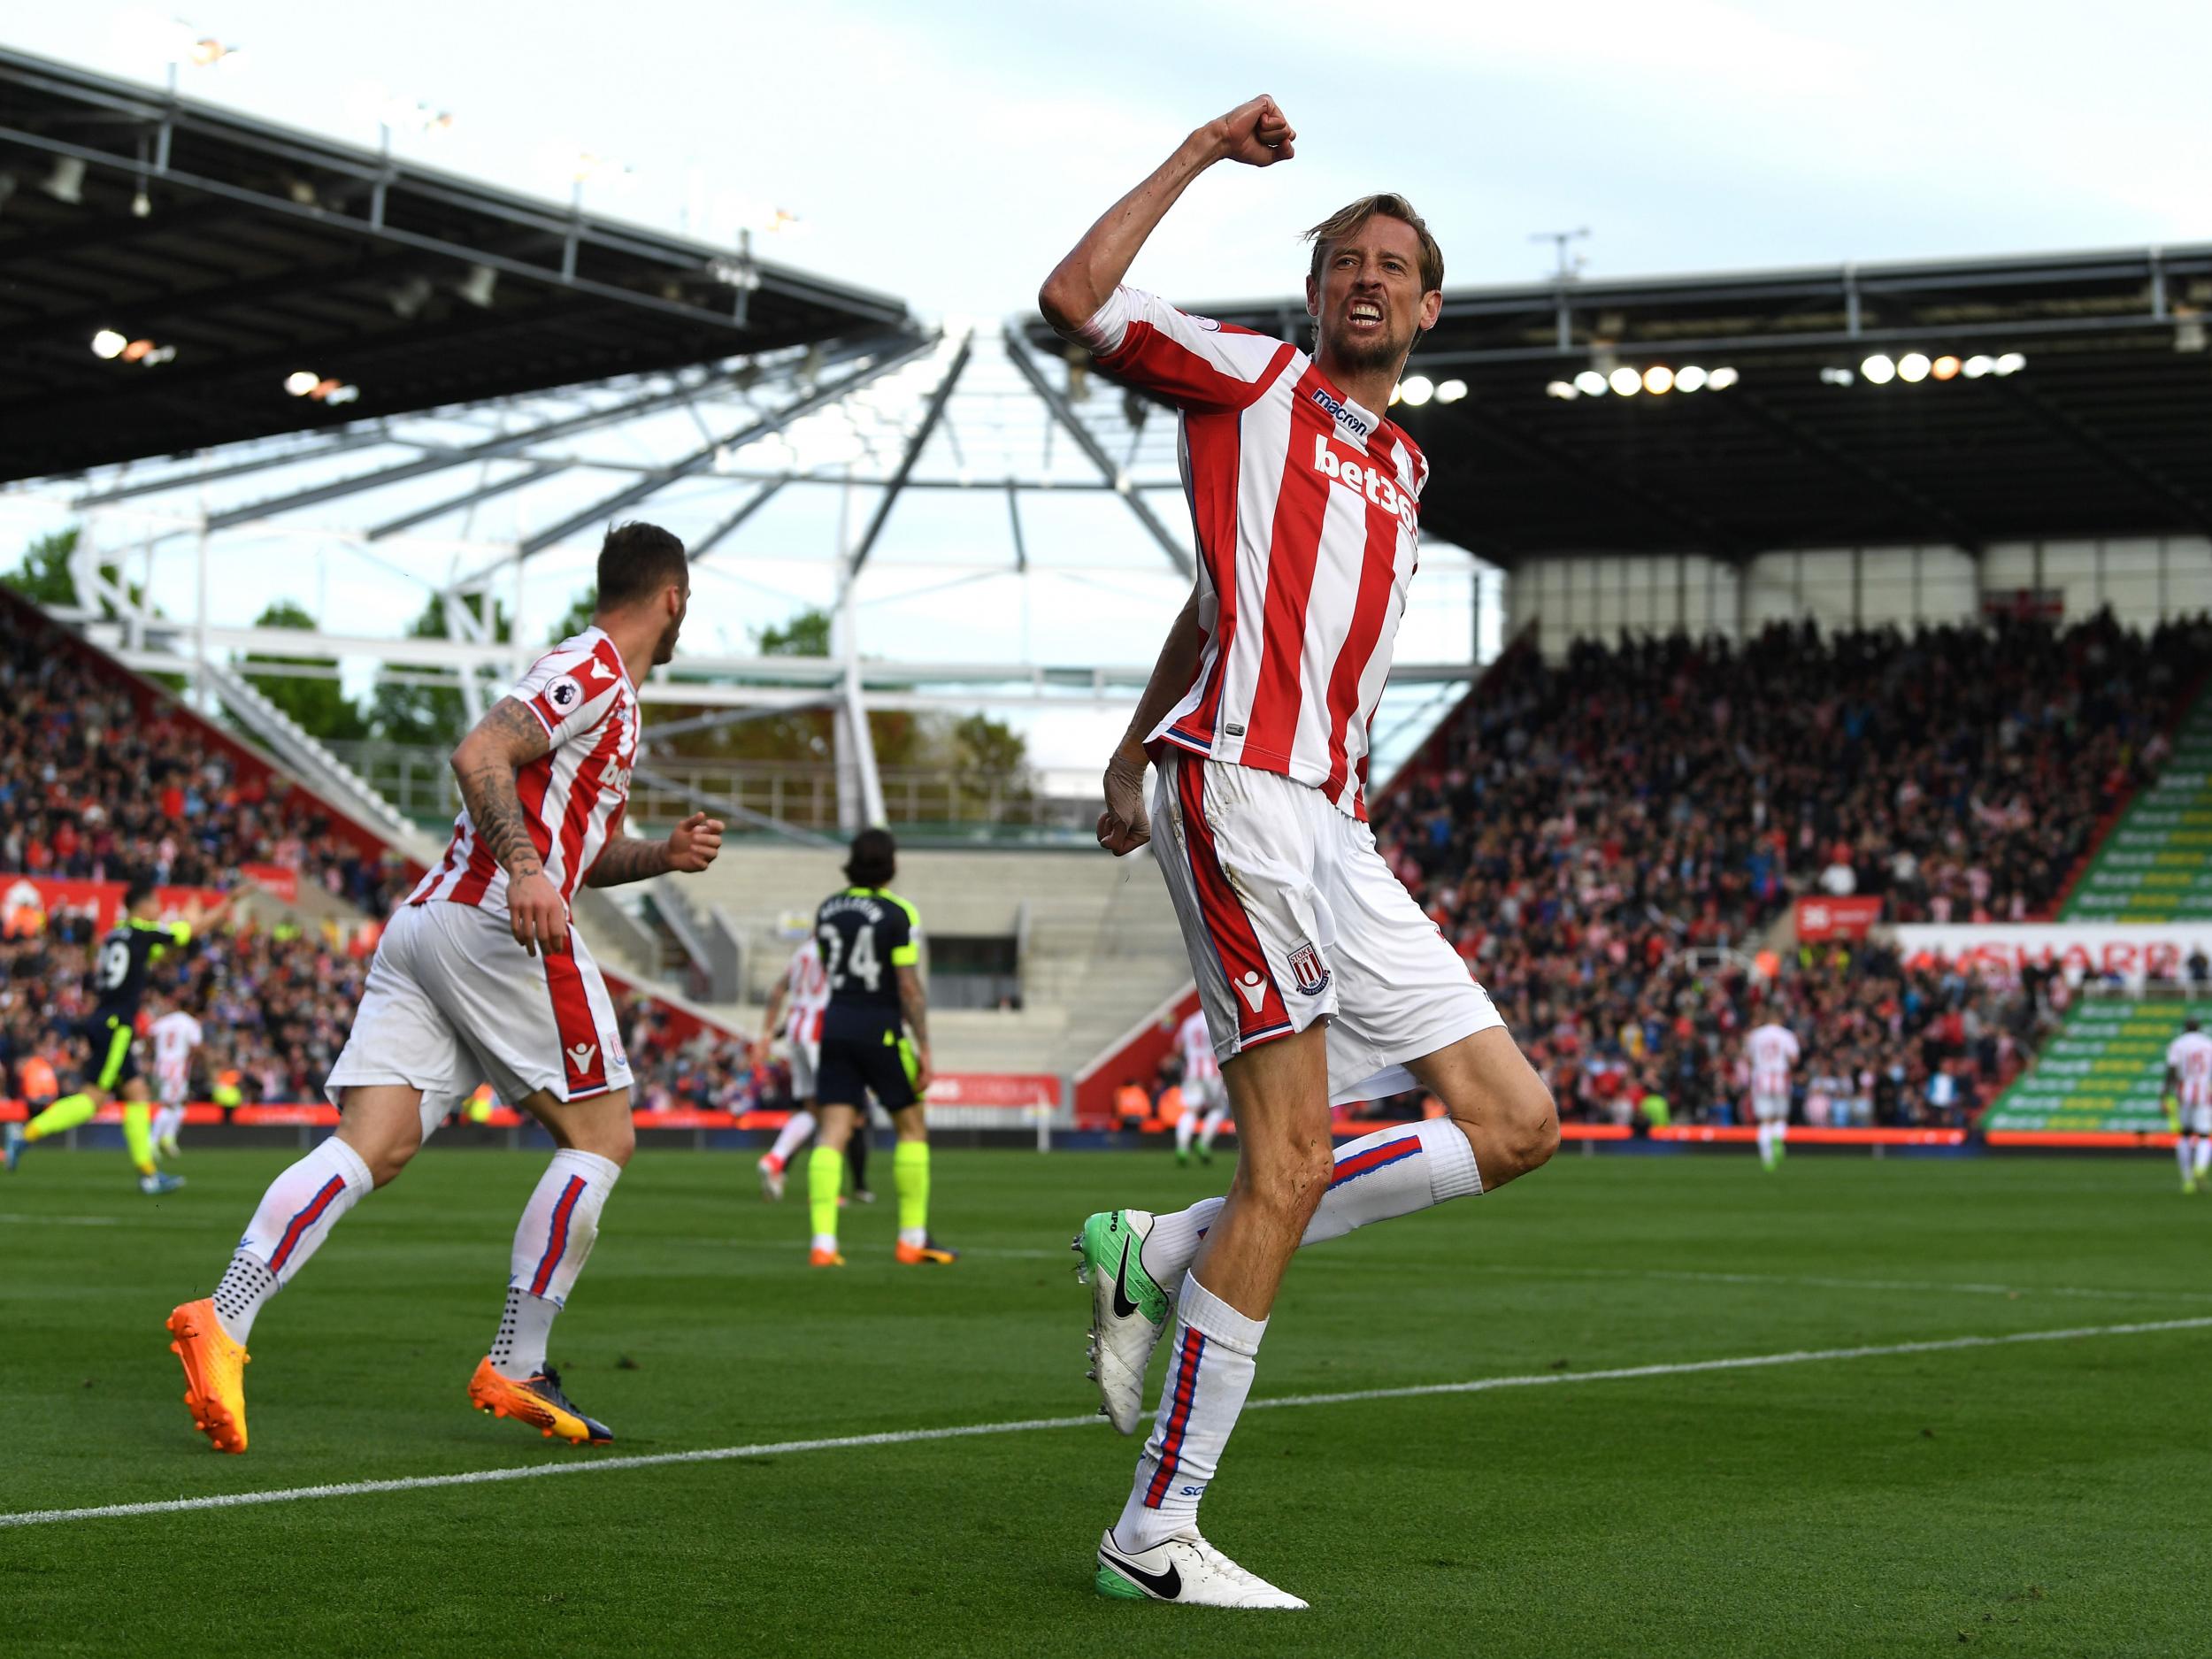 36-year-old Peter Crouch was Stoke's top scorer last season with 10 goals